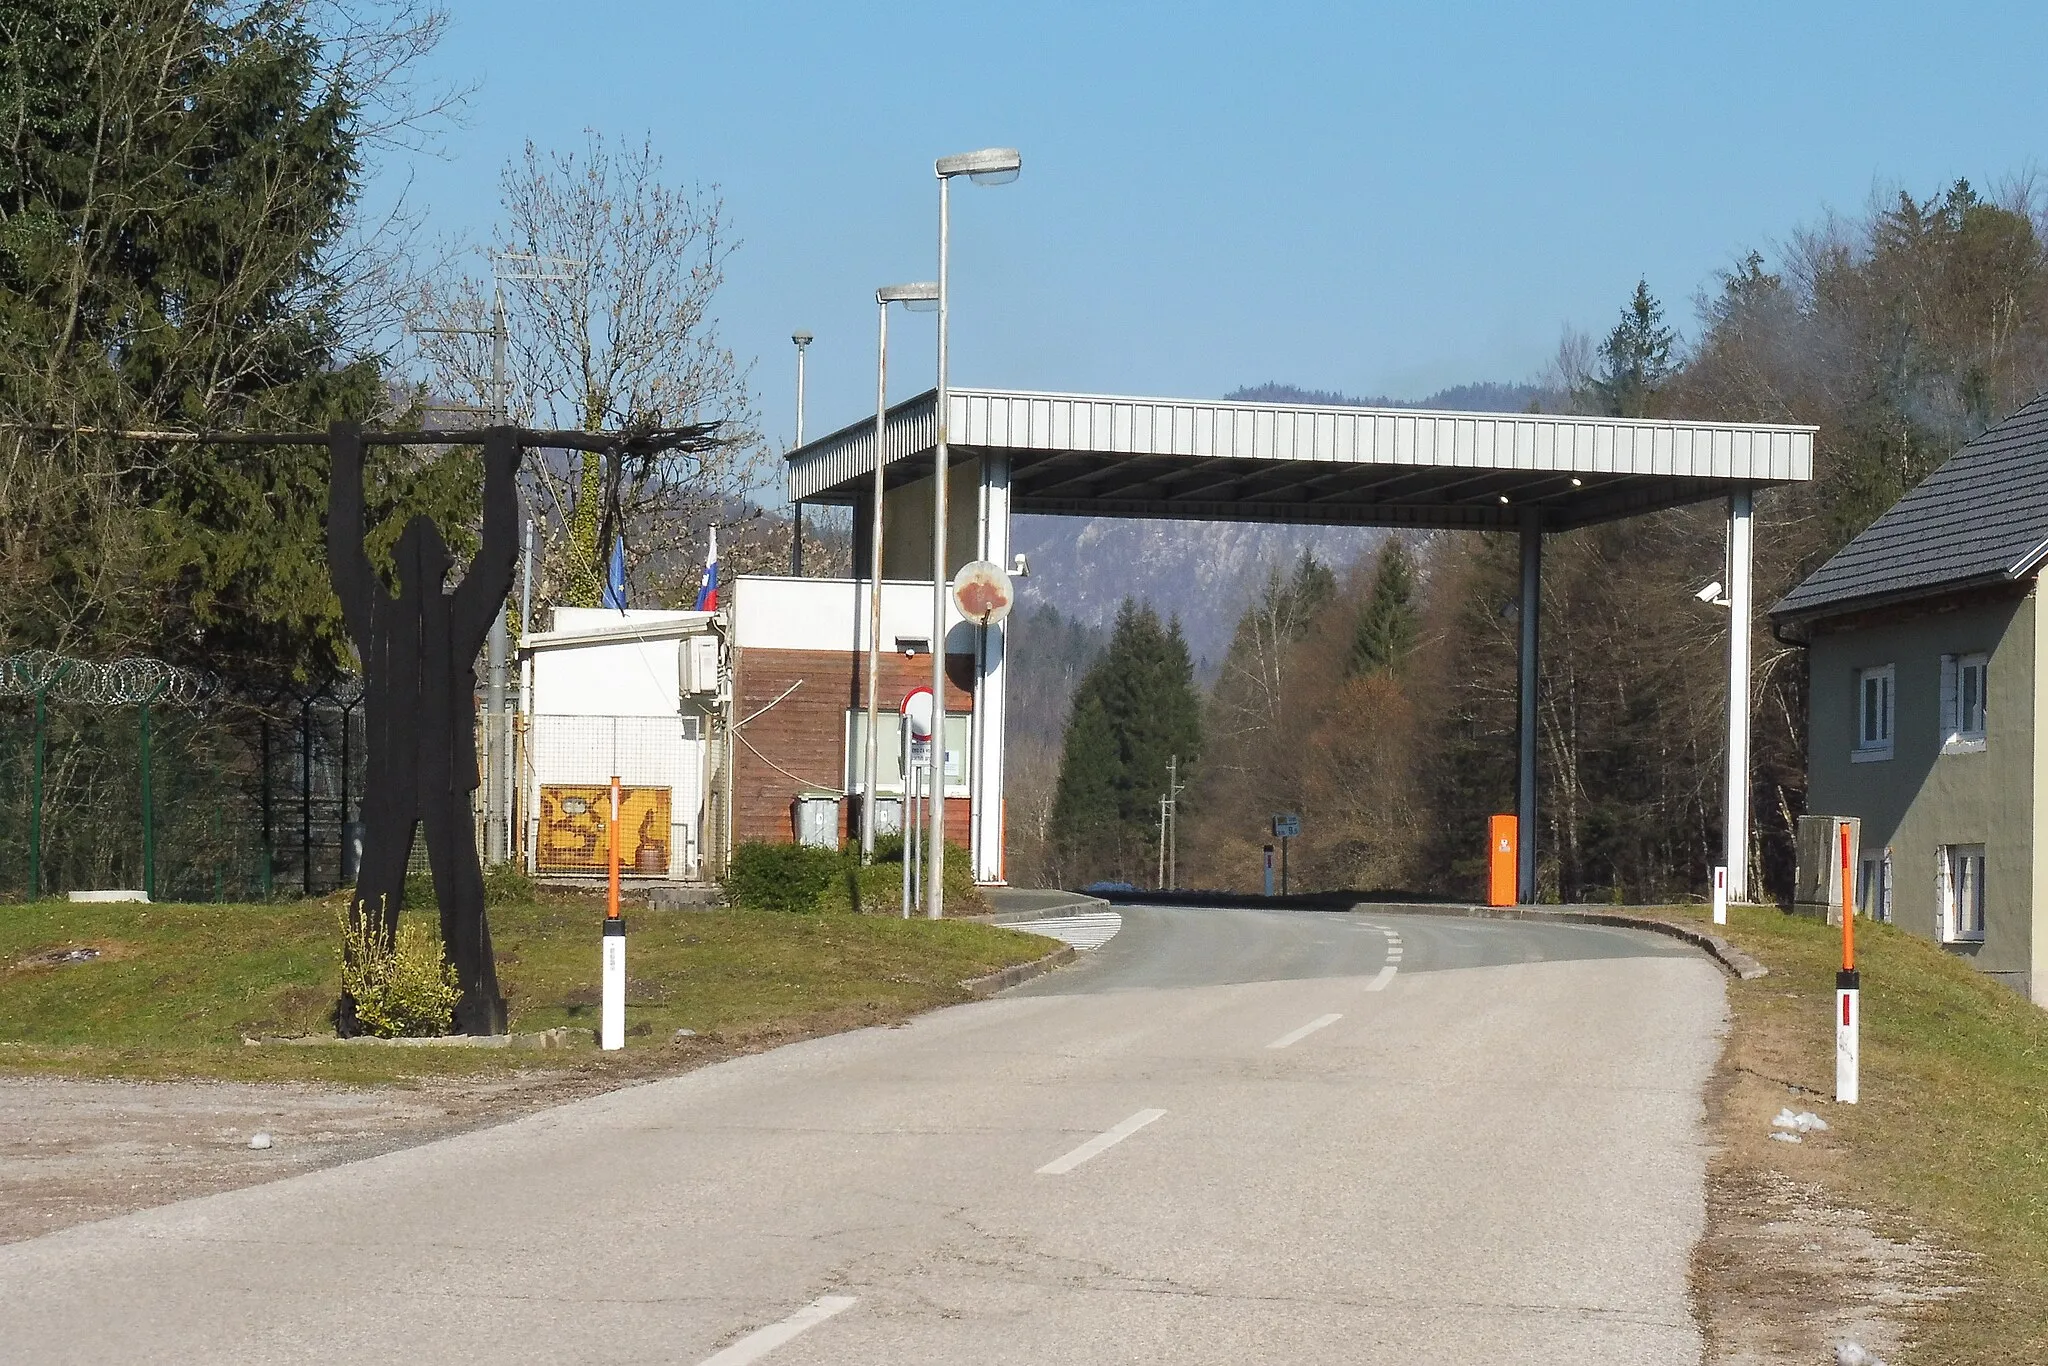 Photo showing: Border crossing for local border traffic Osilnica (Slovenia)/Zamost (Croatia), a month after the abolishment of border control. Passengers entering the municipality of Osilnica are greeted by a wooden Peter Klepec.